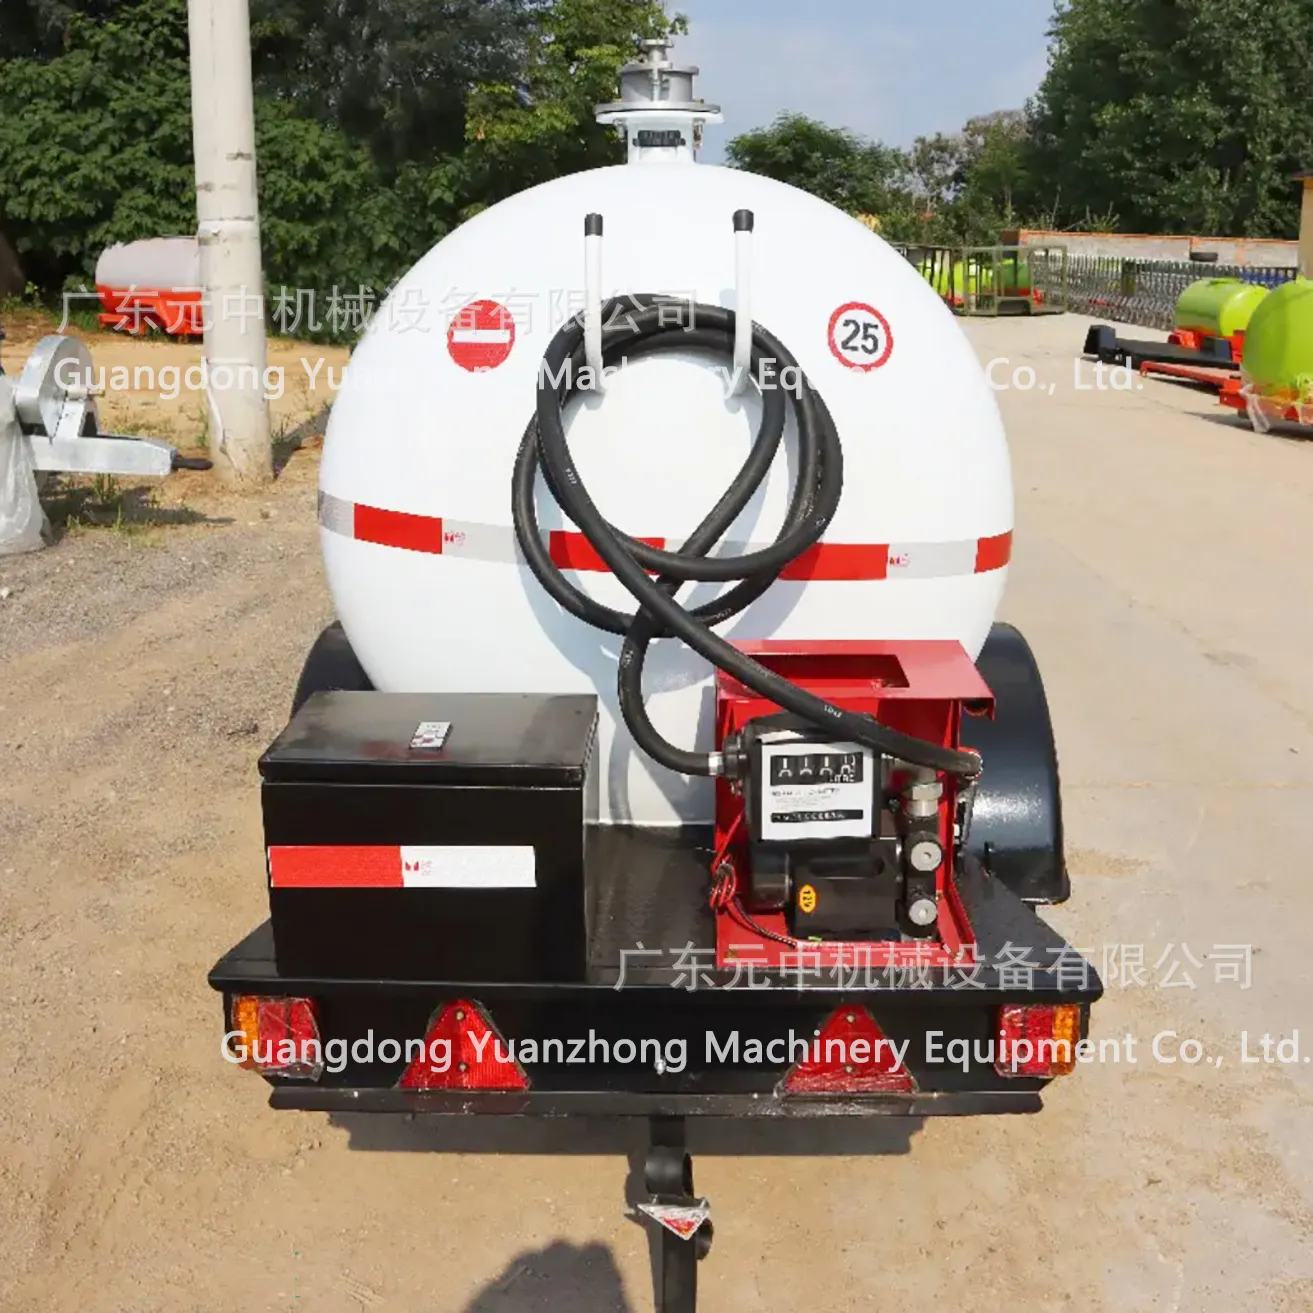 Mobile Fueling Station: Diesel Tank Trailer  50m3 Explosion-Proof Skid-Mounted Fueling Station for Mining Site excellent Quality